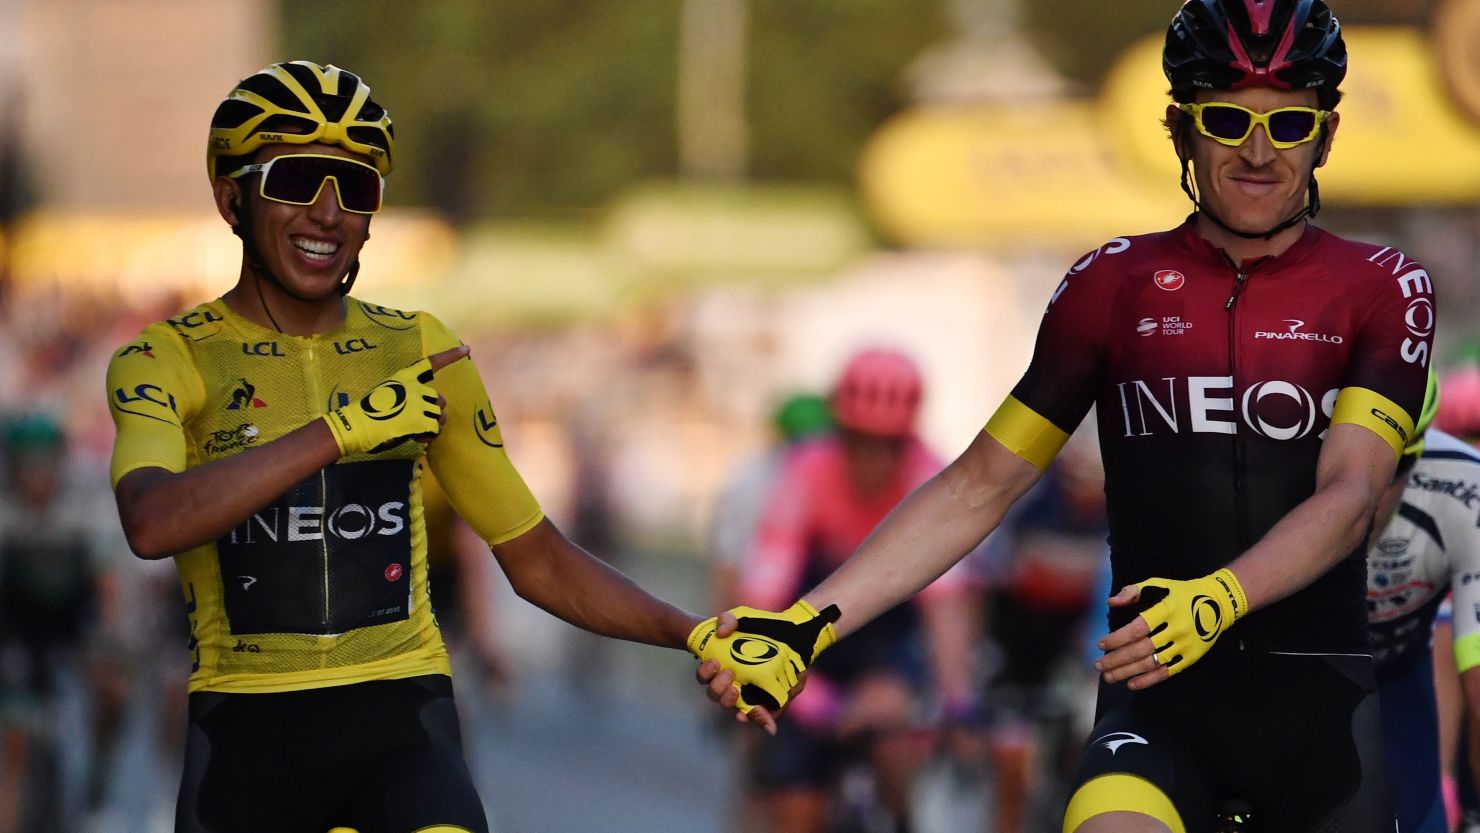 Colombia's Egan Bernal, wearing the overall leader's yellow jersey,  is congratulated by teammate Britain's Geraint Thomas as he celebrates his victory on the finish line of the 21st and last stage of the 106th edition of the Tour de France.